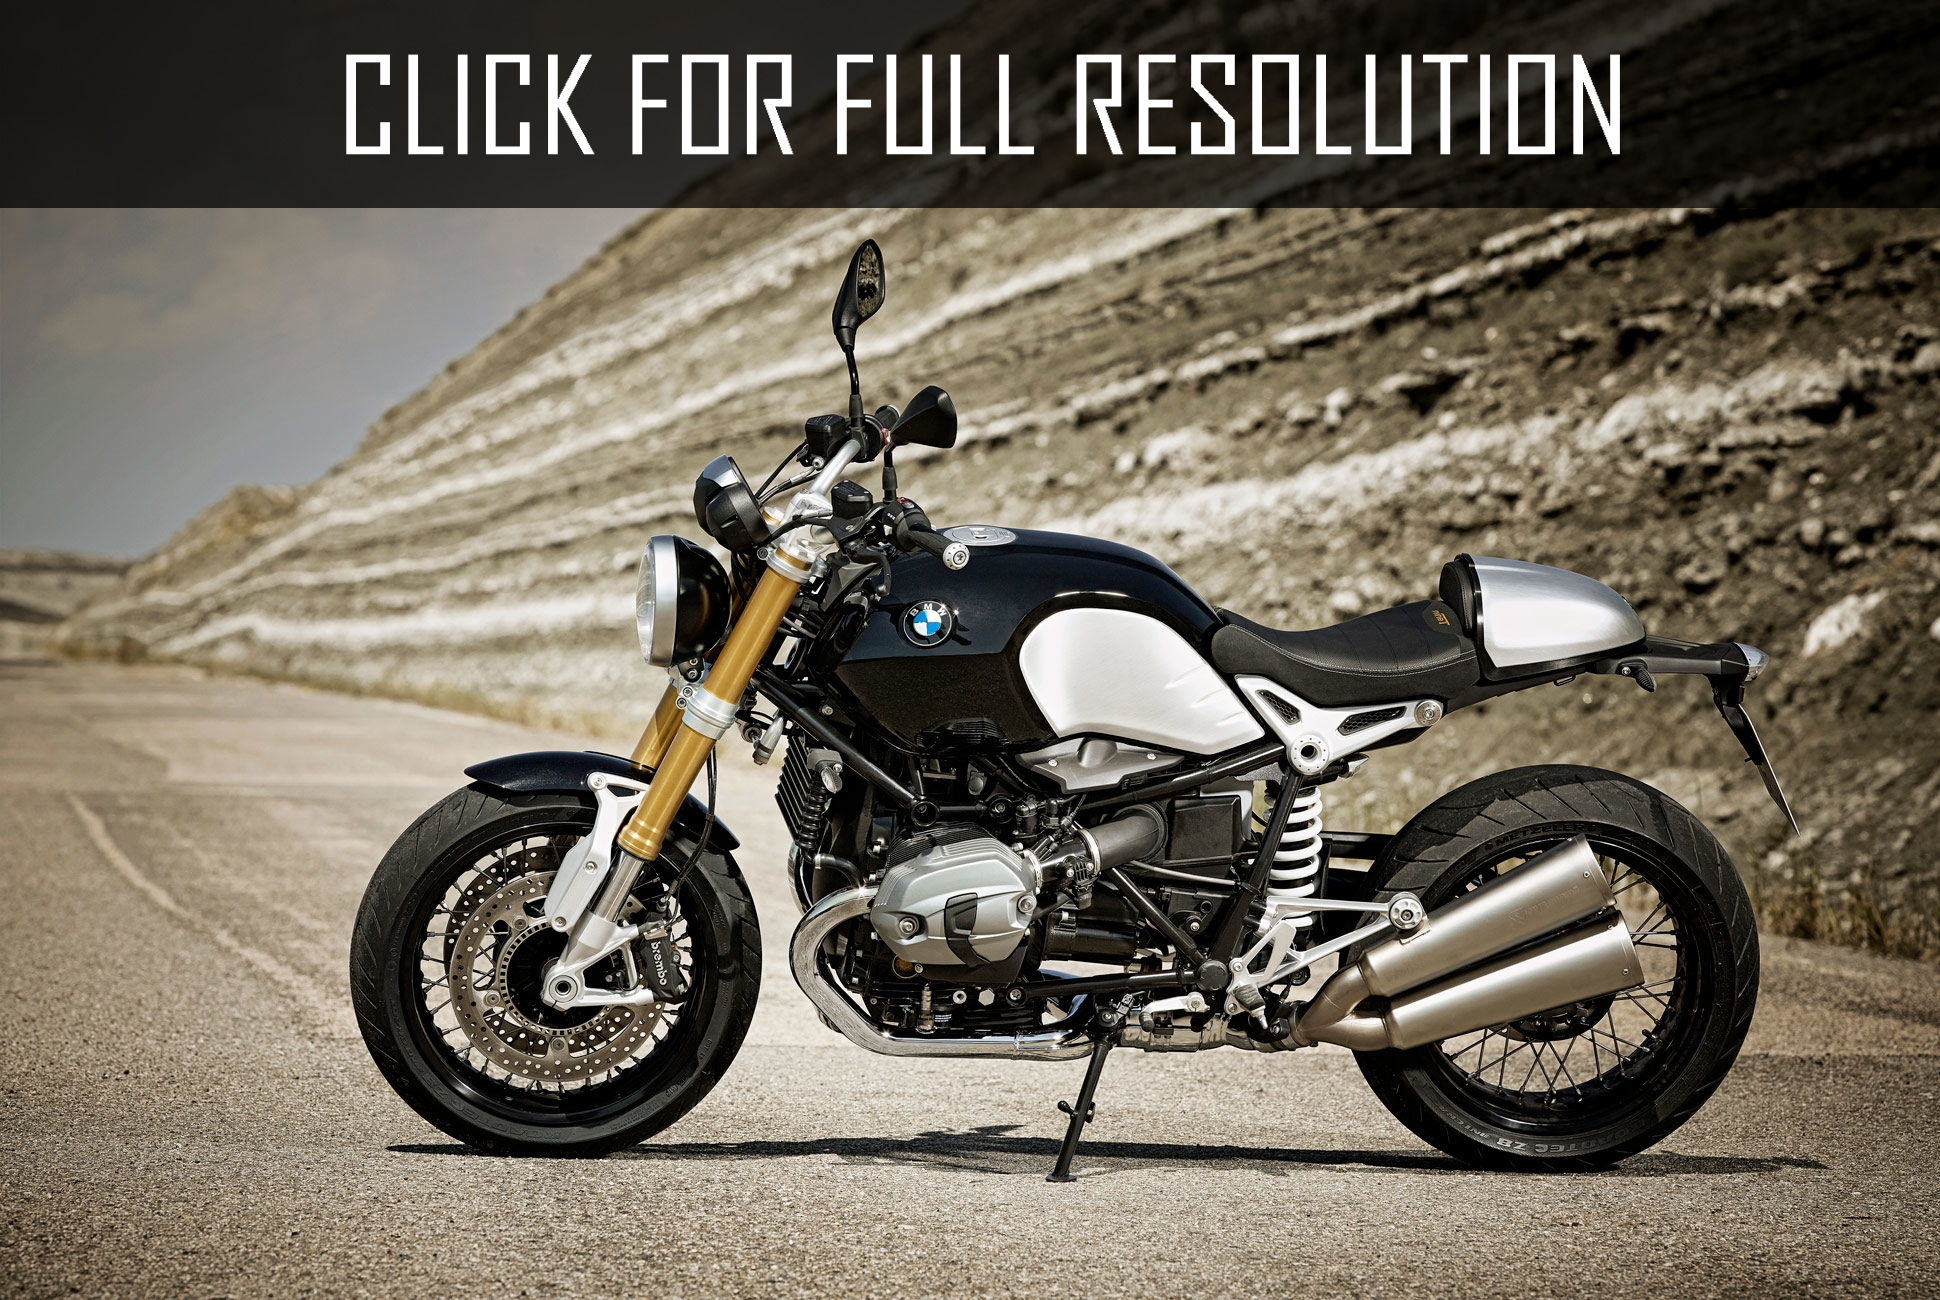 Bmw R9t amazing photo gallery, some information and specifications